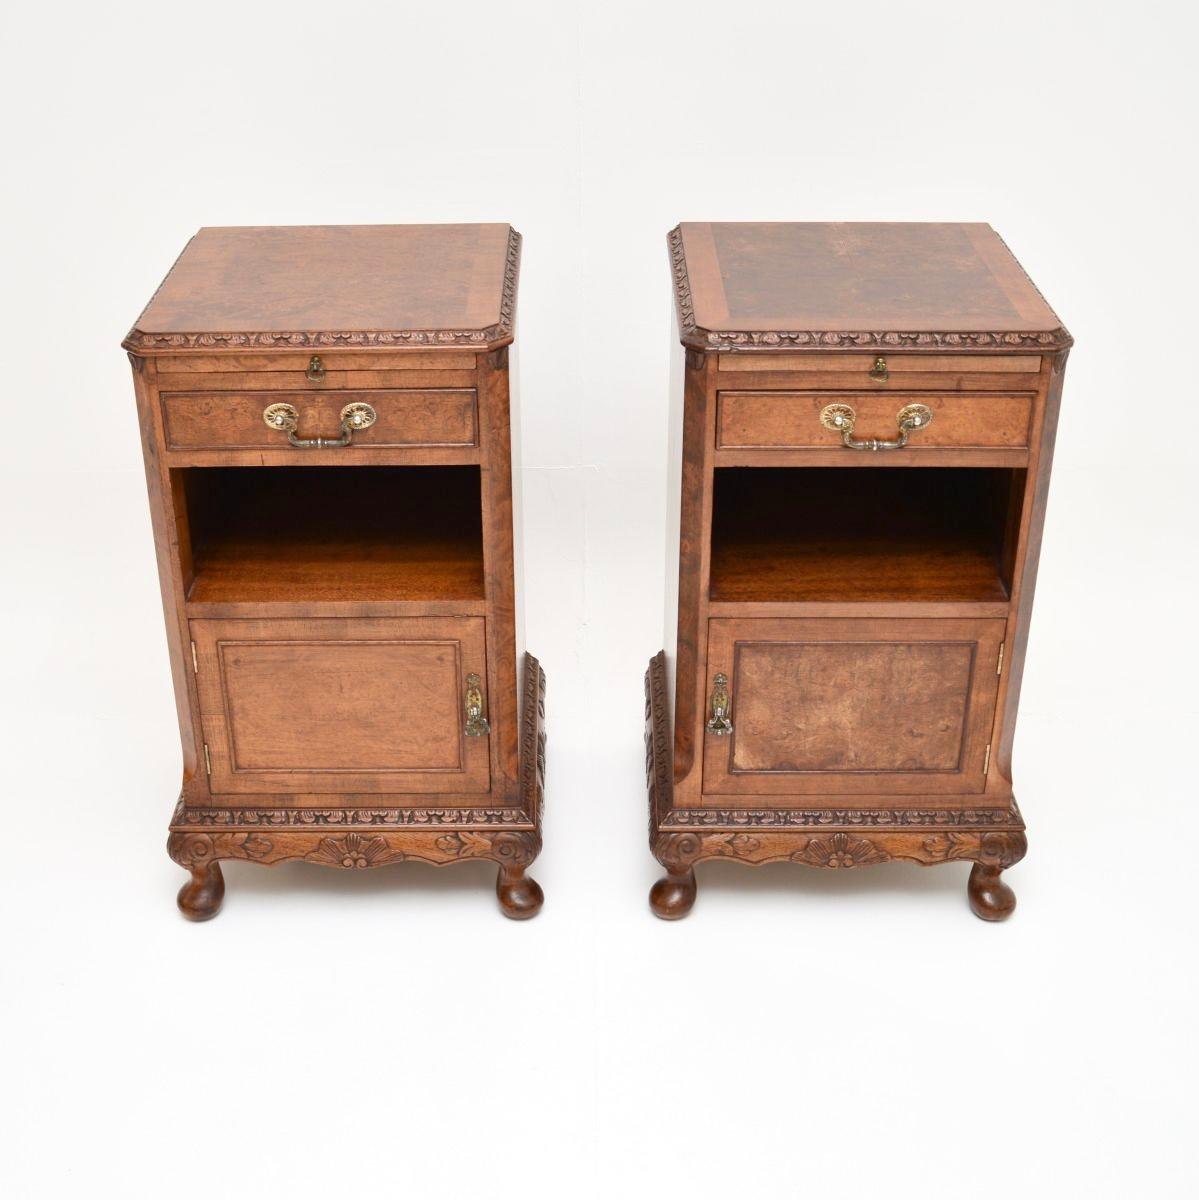 A fantastic pair of antique burr walnut bedside cabinets. They are in the Queen Anne style, they date from the 1920-30’s.

The quality is exceptional, they have stunning burr walnut grain patterns and crisp carving throughout. The tops are cross